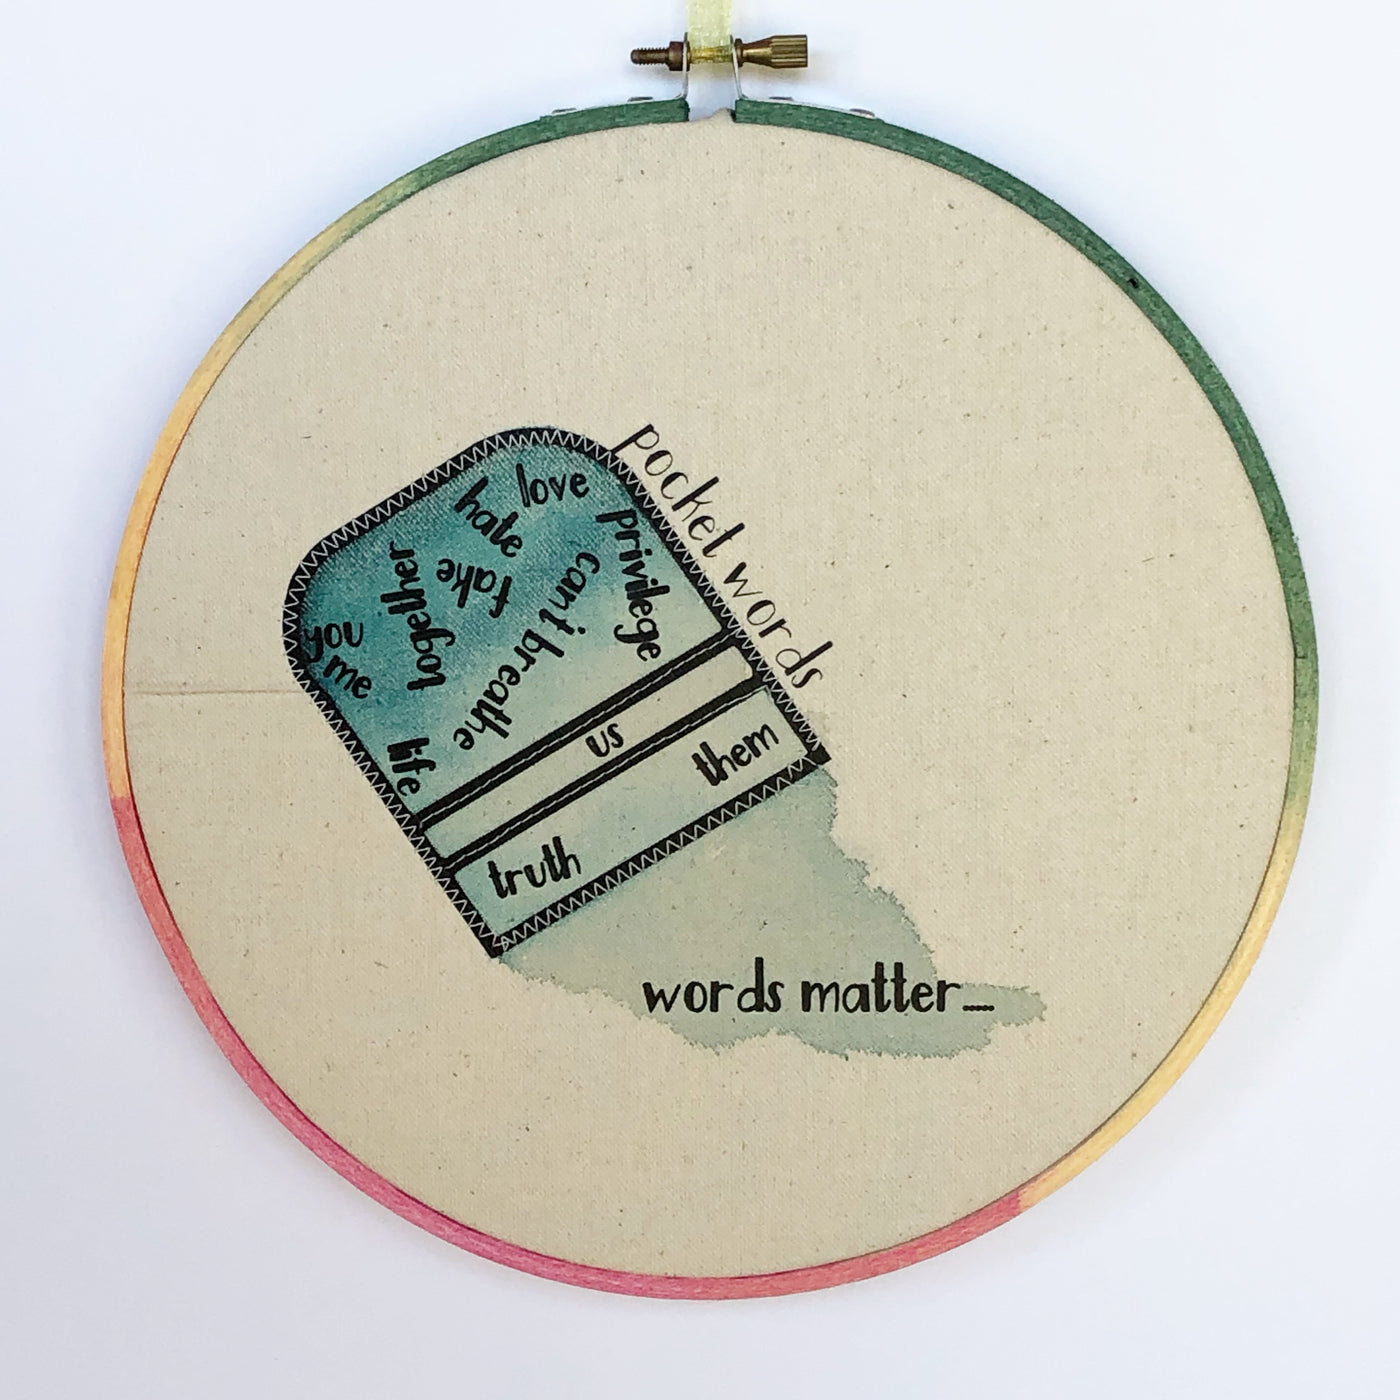 a canvas hoop art piece with a blue painted upside down pocket and the words, "you, me life together love fake, hate, privilege, can't breathe, truth, us, them and words matter.." 